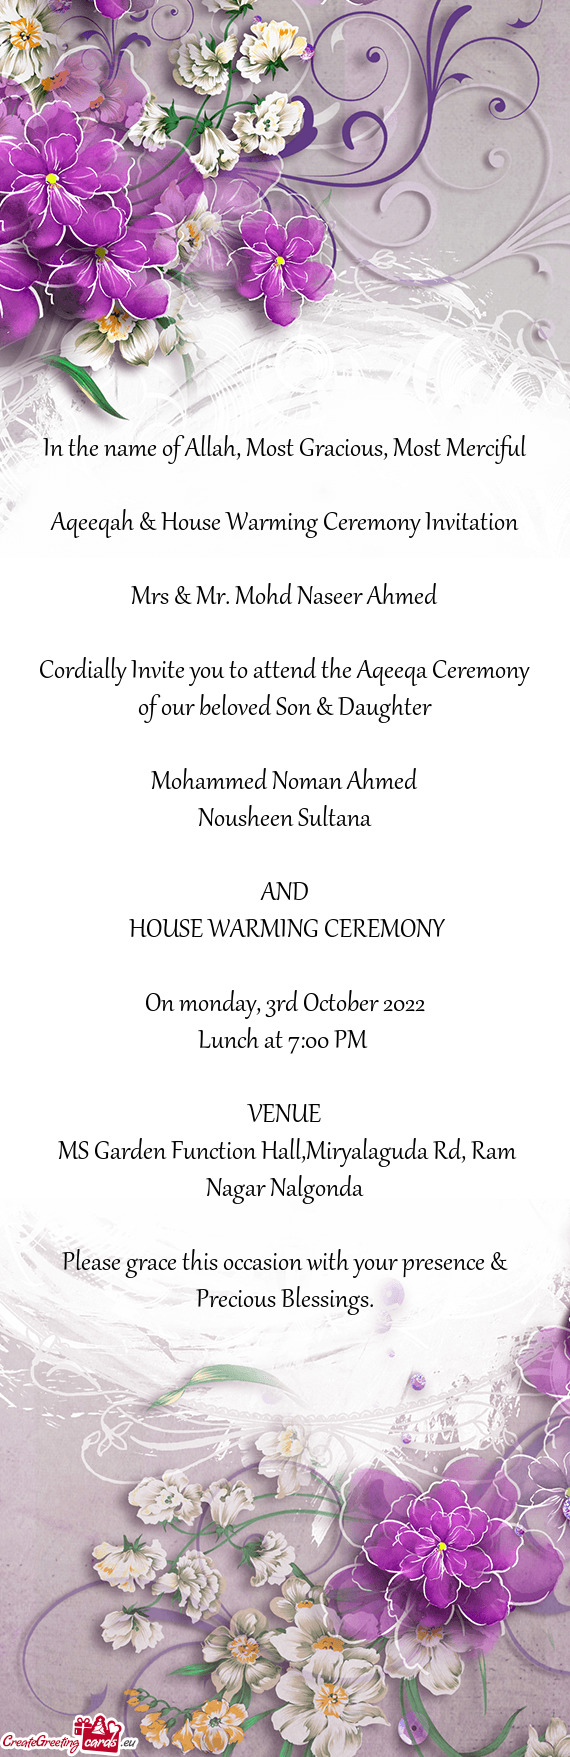 Cordially Invite you to attend the Aqeeqa Ceremony of our beloved Son & Daughter